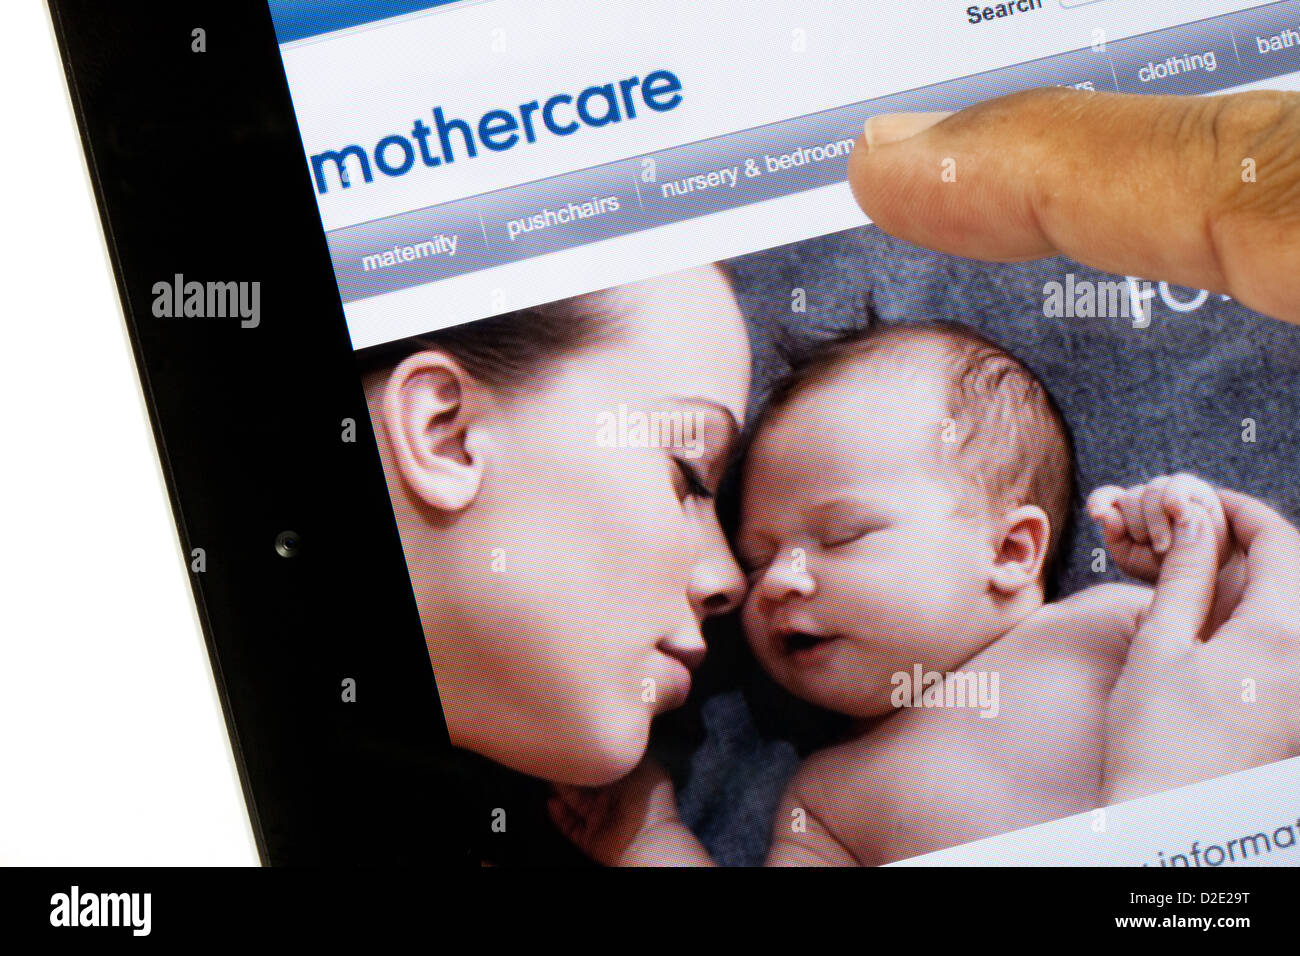 A person shopping on the internet at the Mothercare website, on an iPad, UK Stock Photo